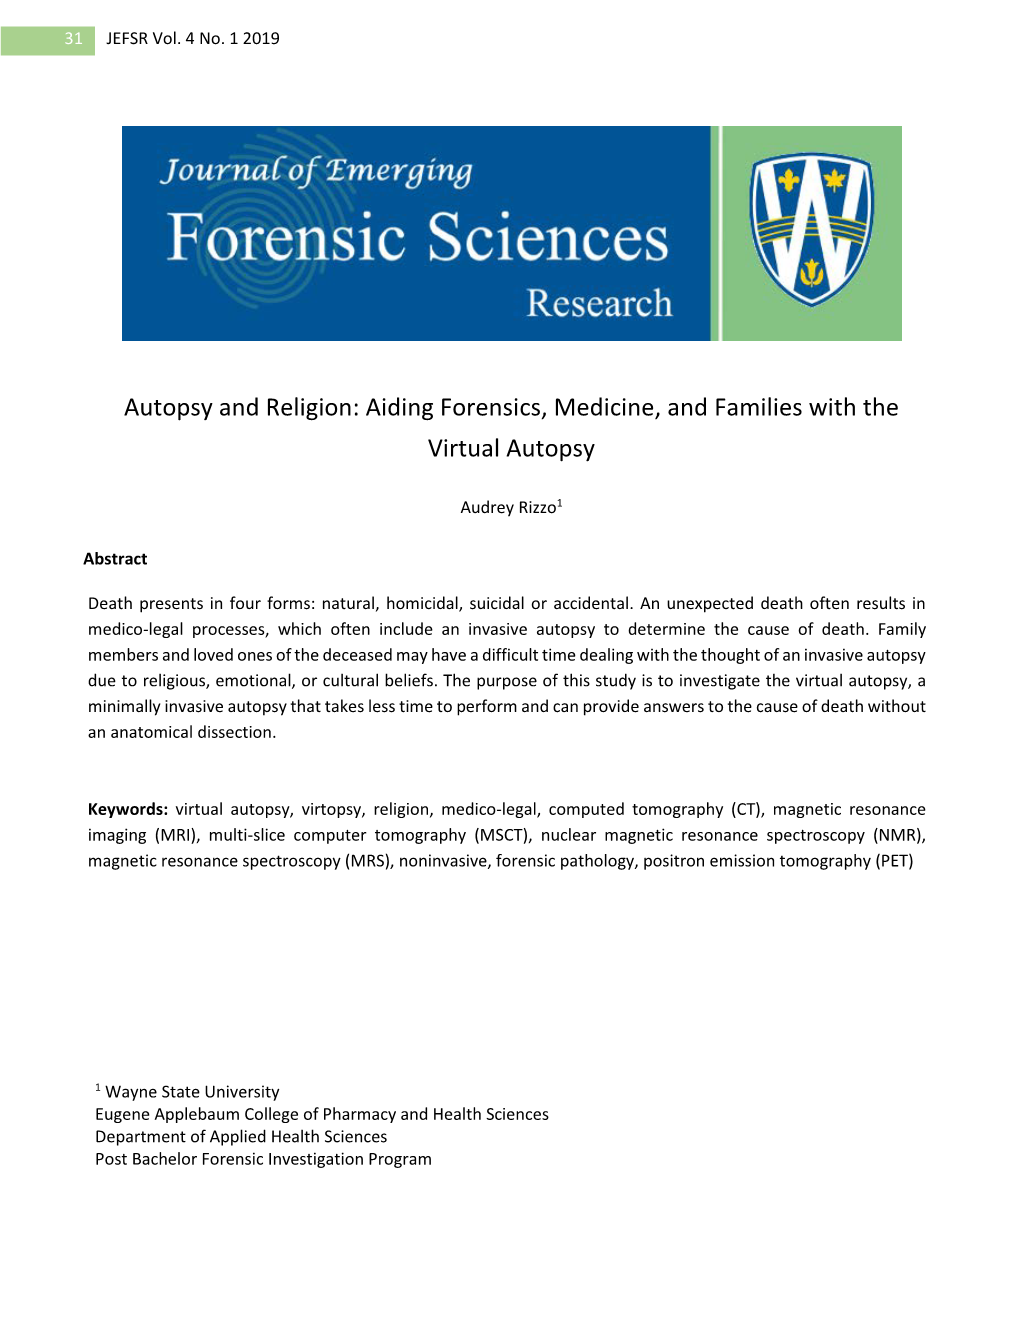 Autopsy and Religion: Aiding Forensics, Medicine, and Families with the Virtual Autopsy